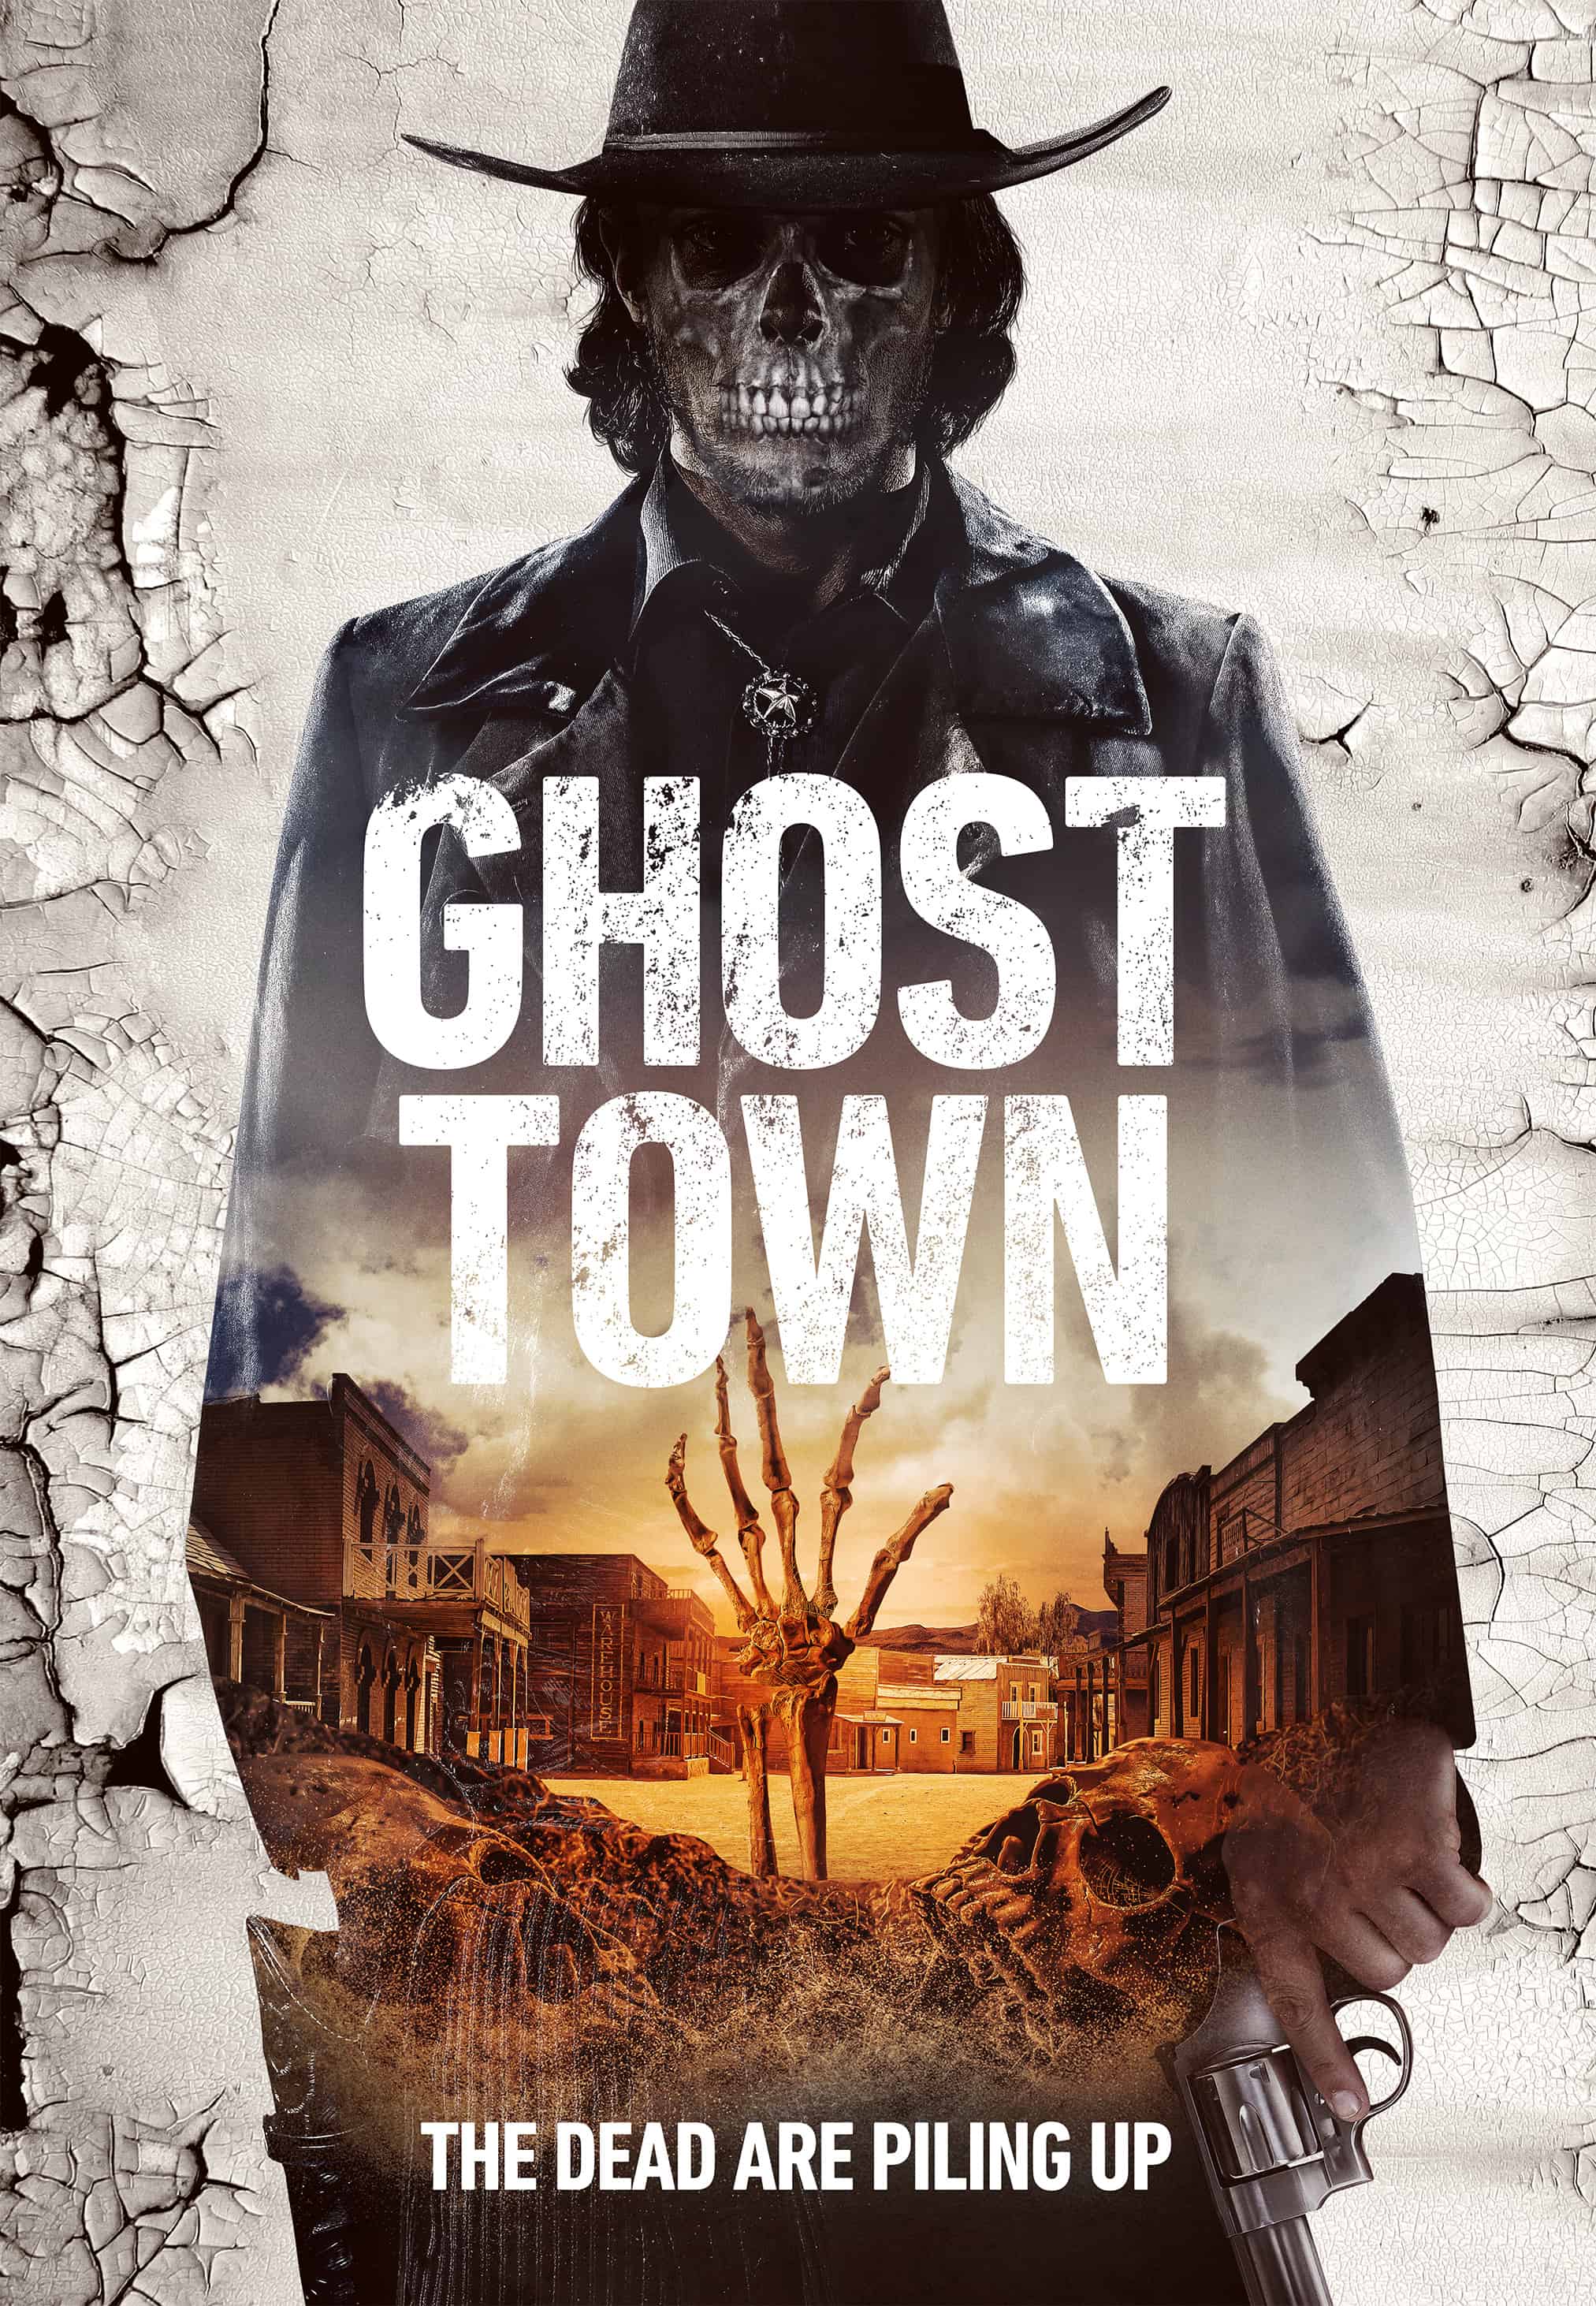 Ghost Town offers up a poster and trailer arrives March 7th 29